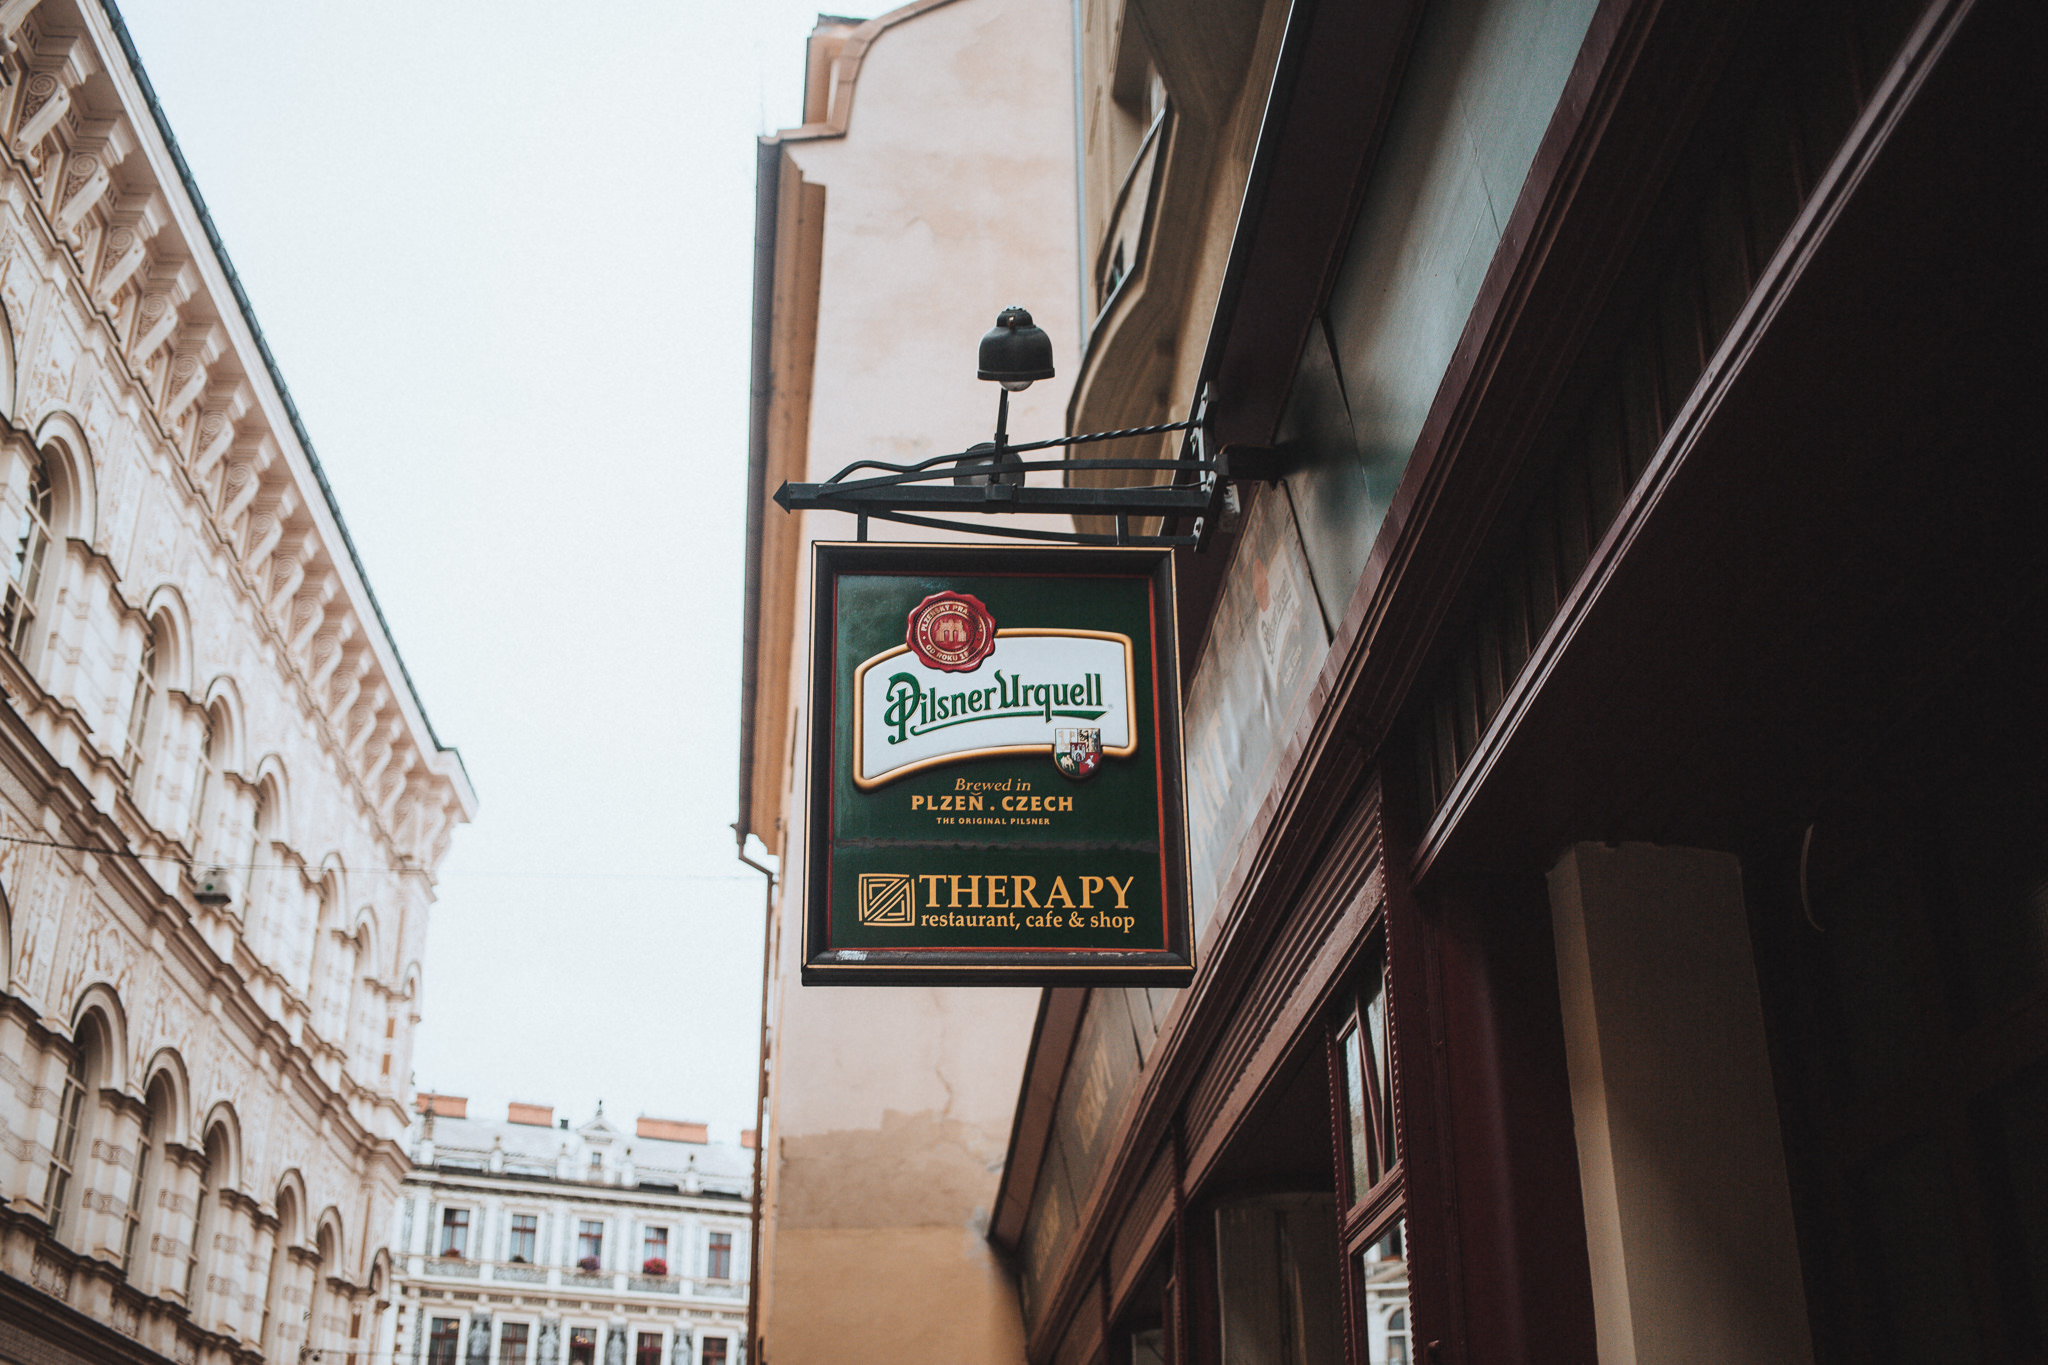   Pilsner Urquell - Brewed since 1842 and the worlds first-ever blond lager.  